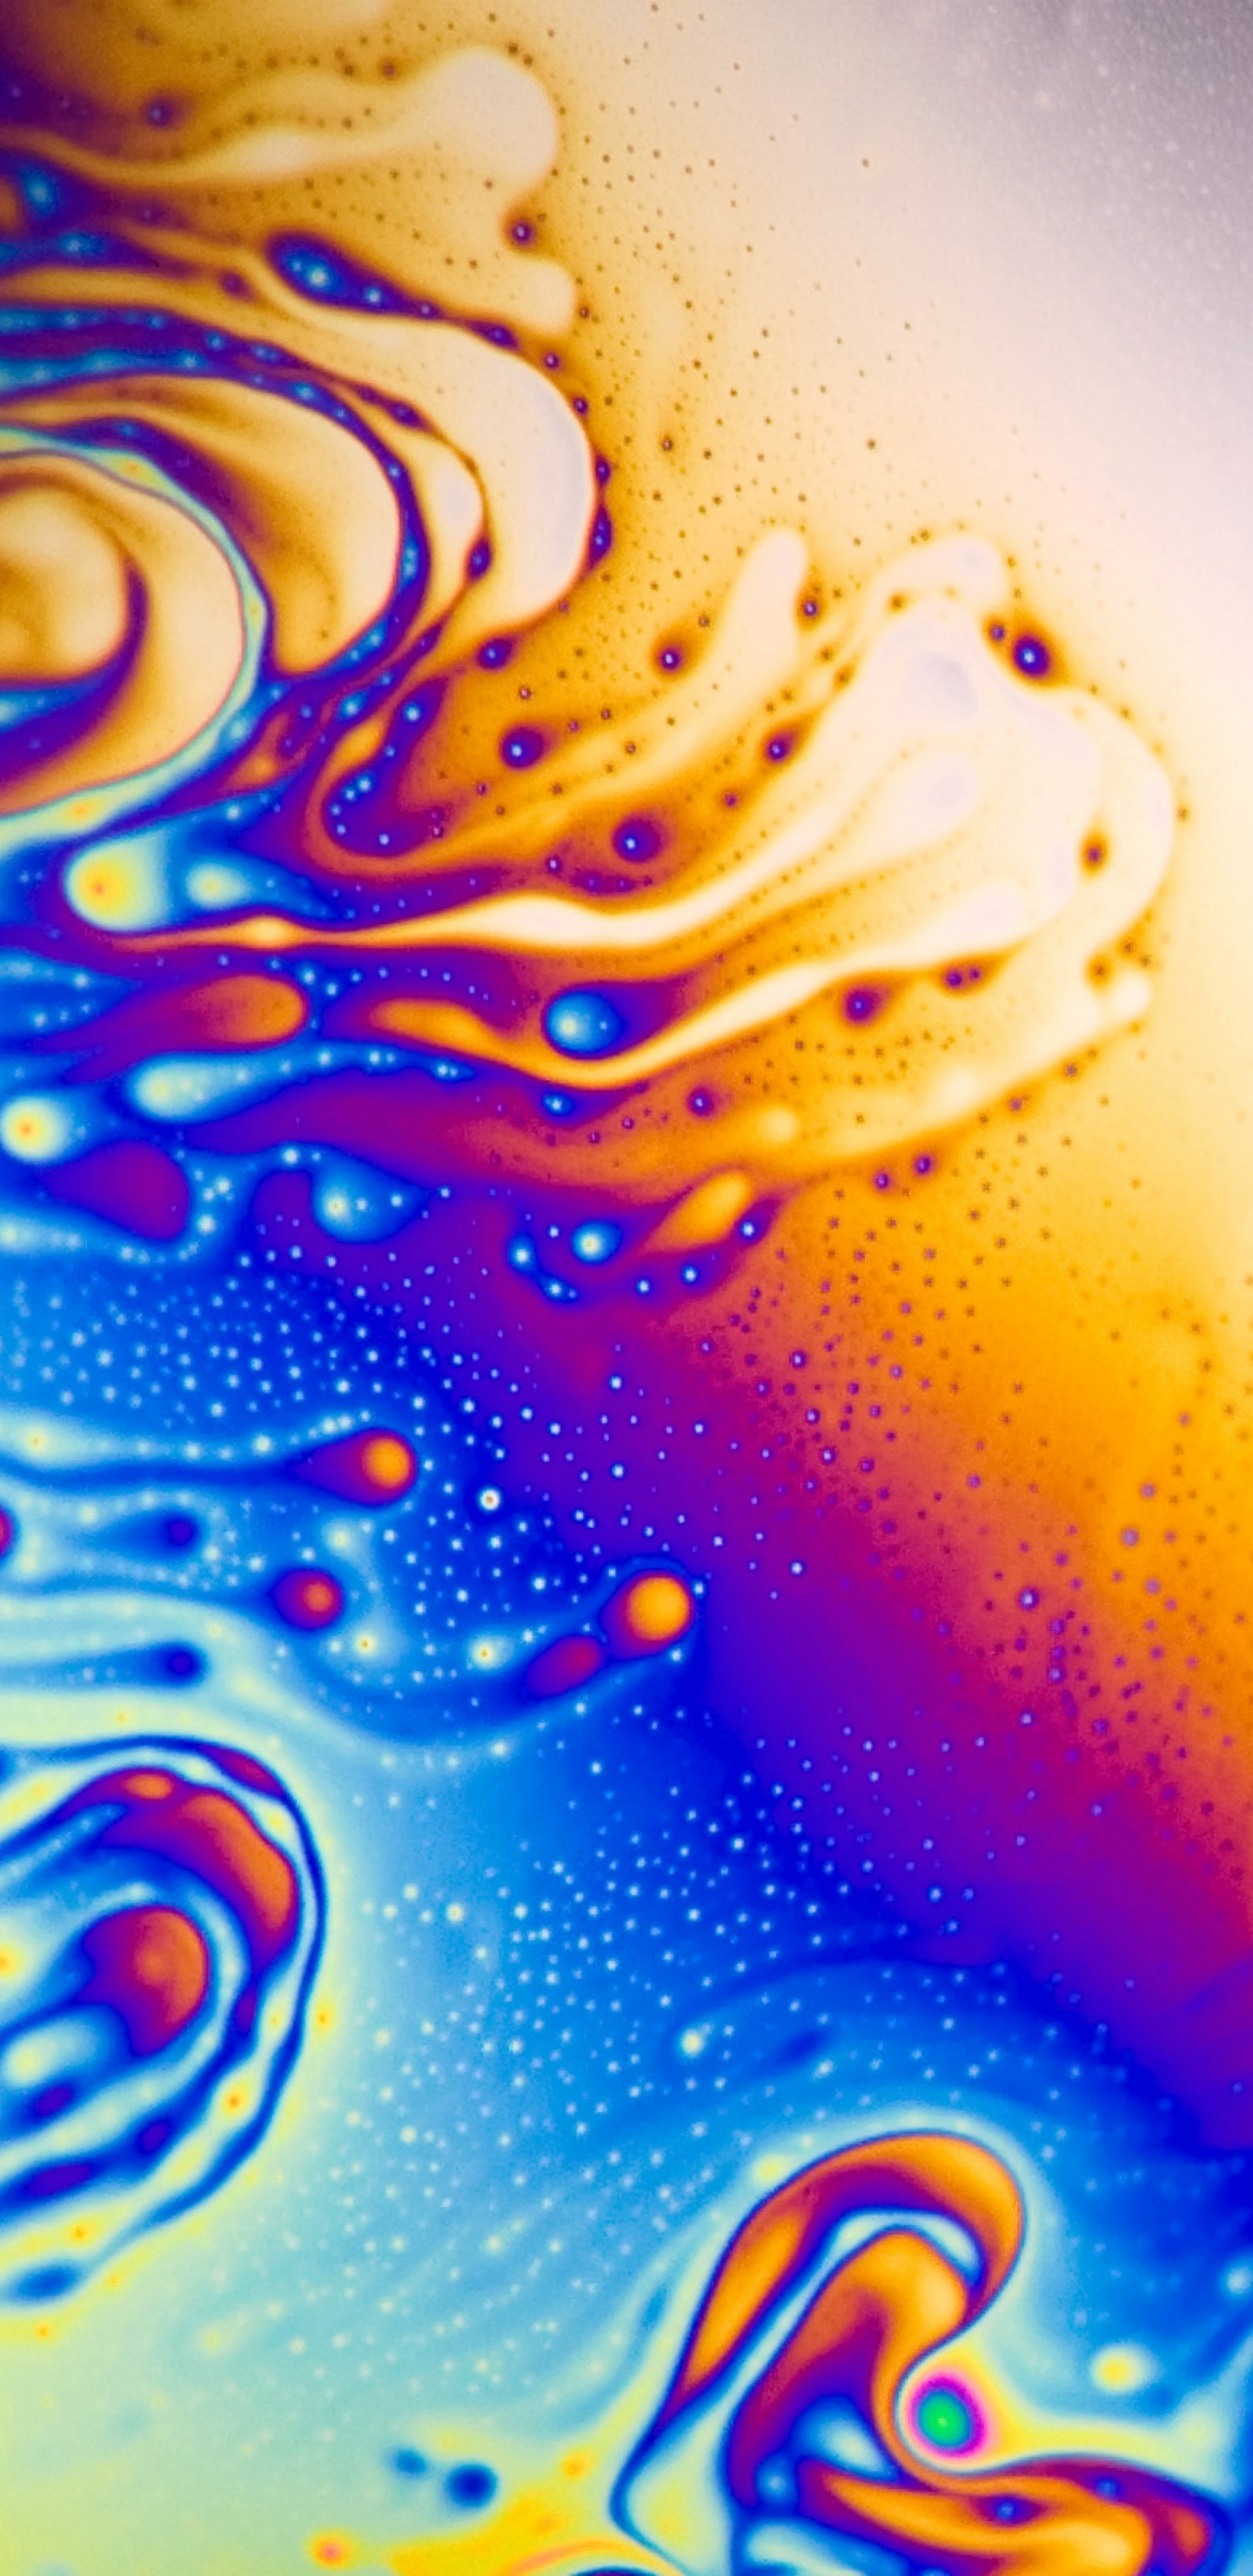 Download 1440x2960 wallpaper colorful, liquid, stains